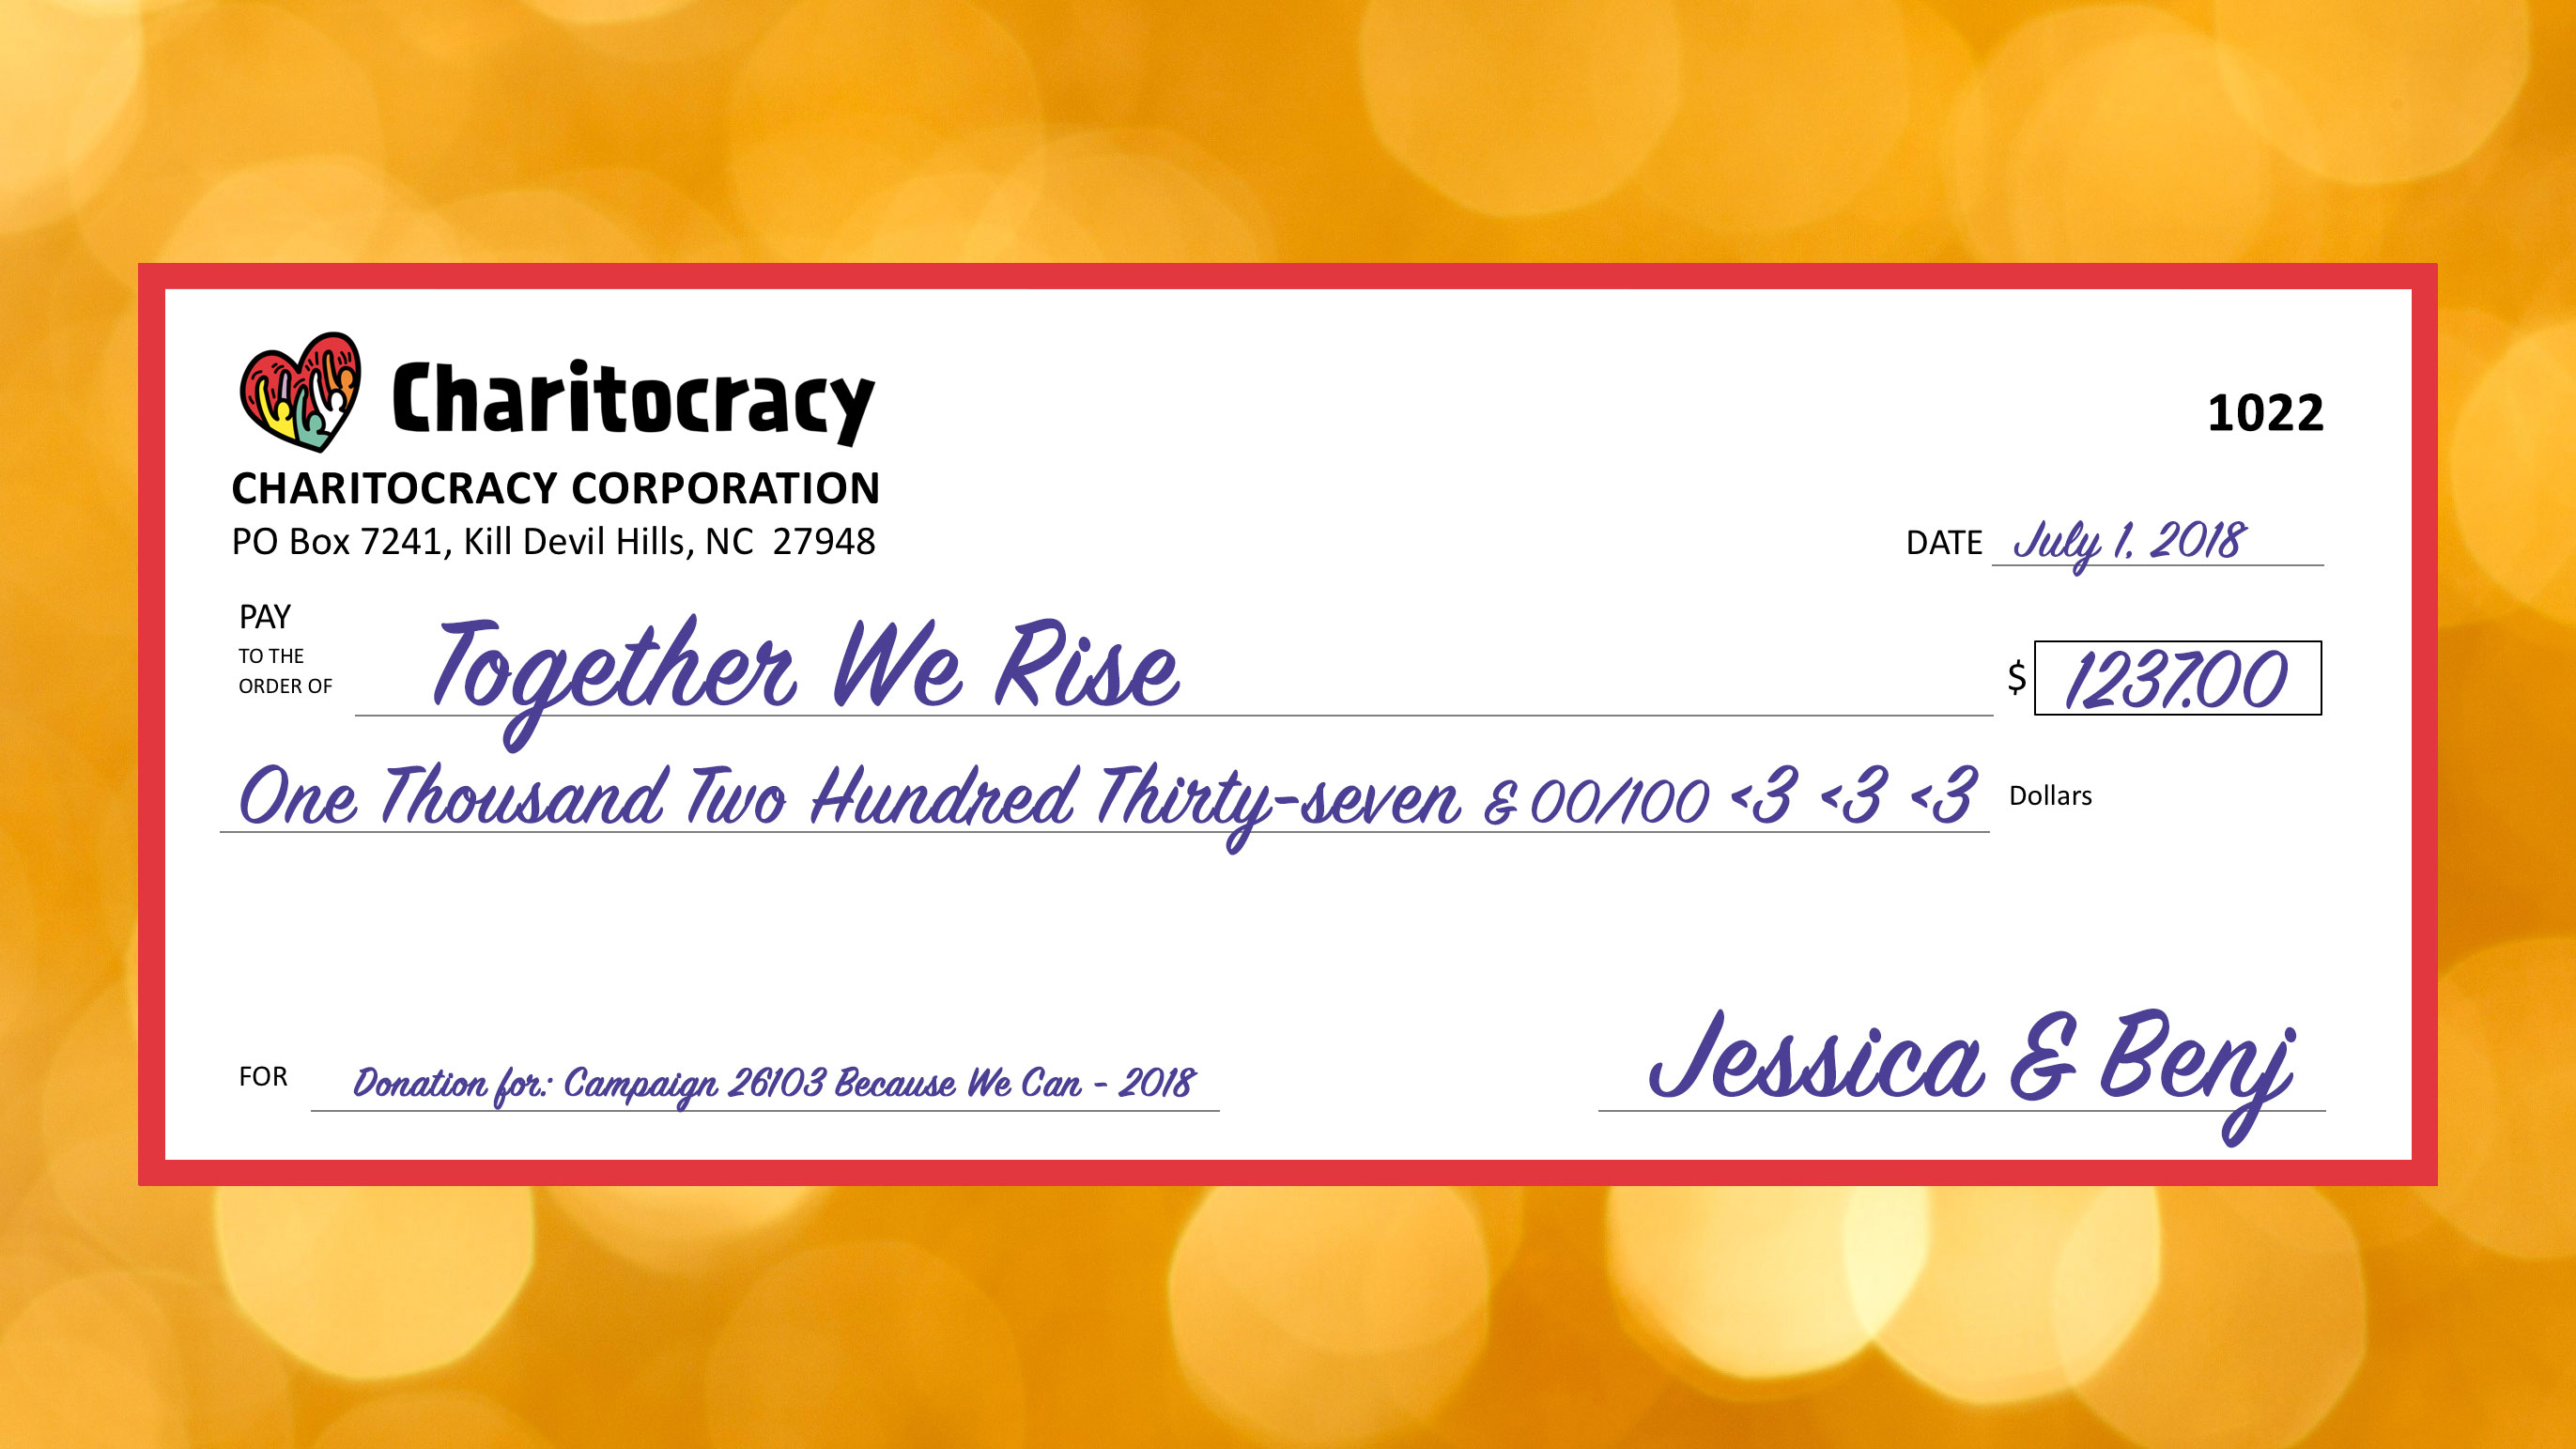 Charitocracy's 22nd check to June winner Together We Rise for $1237